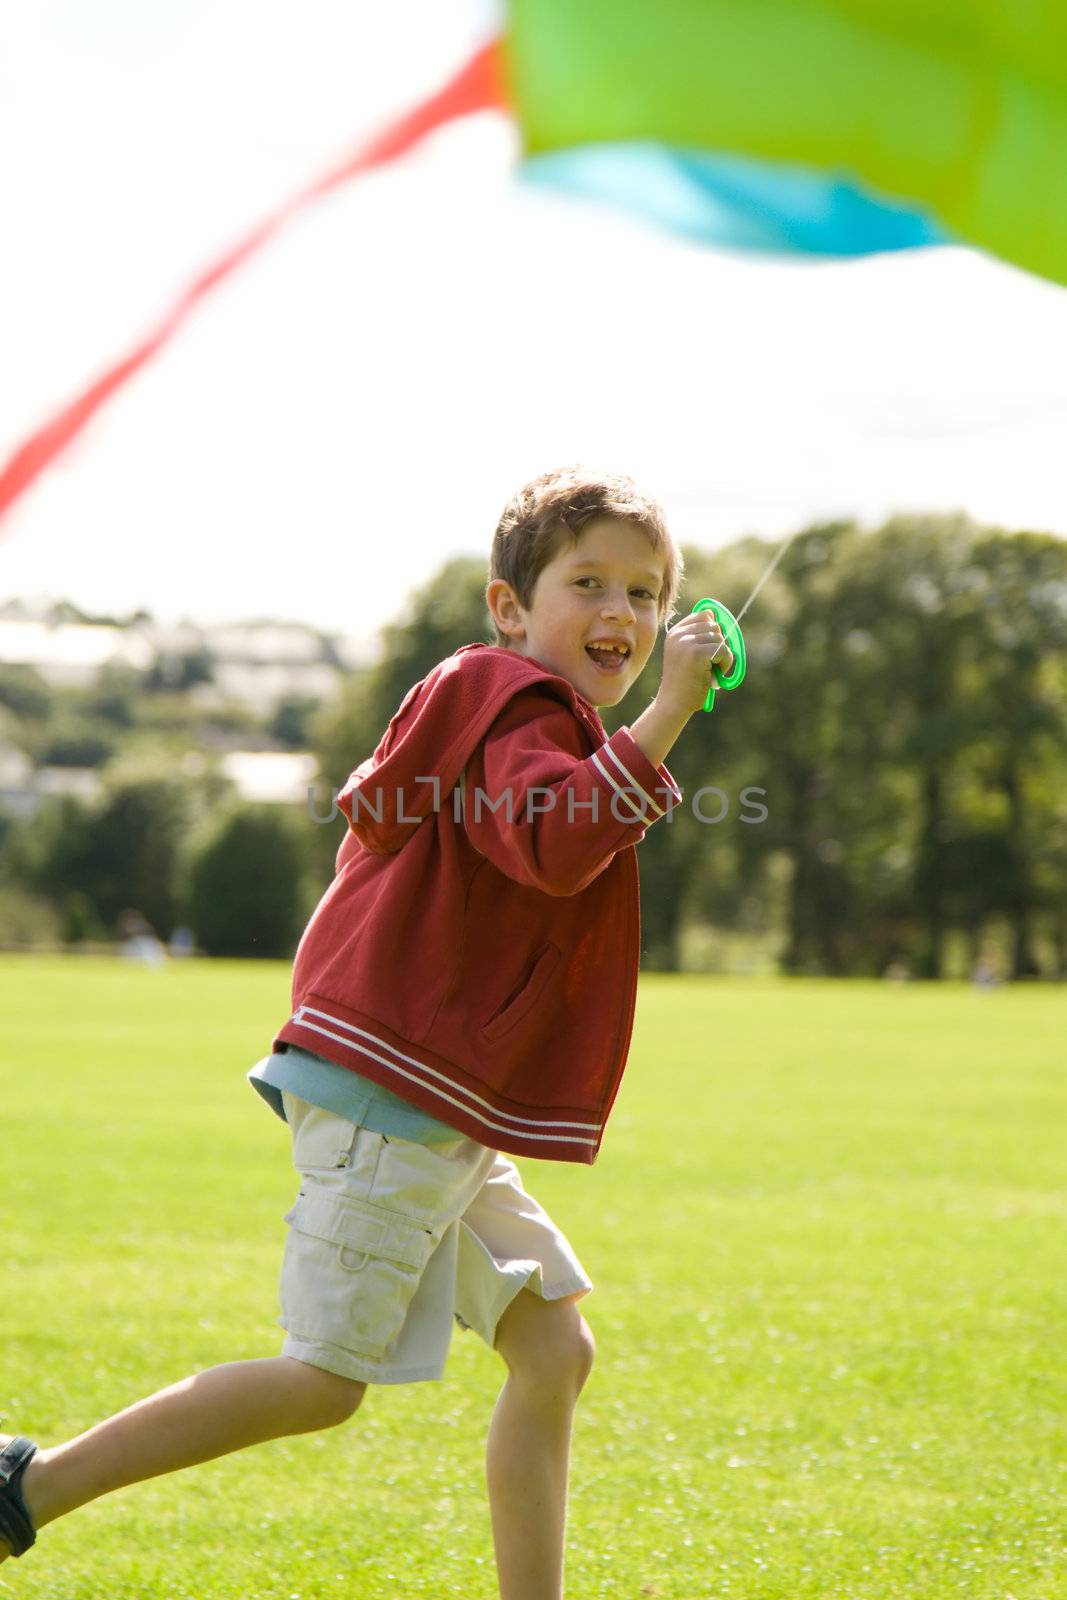 Boy running and laughing with a kite